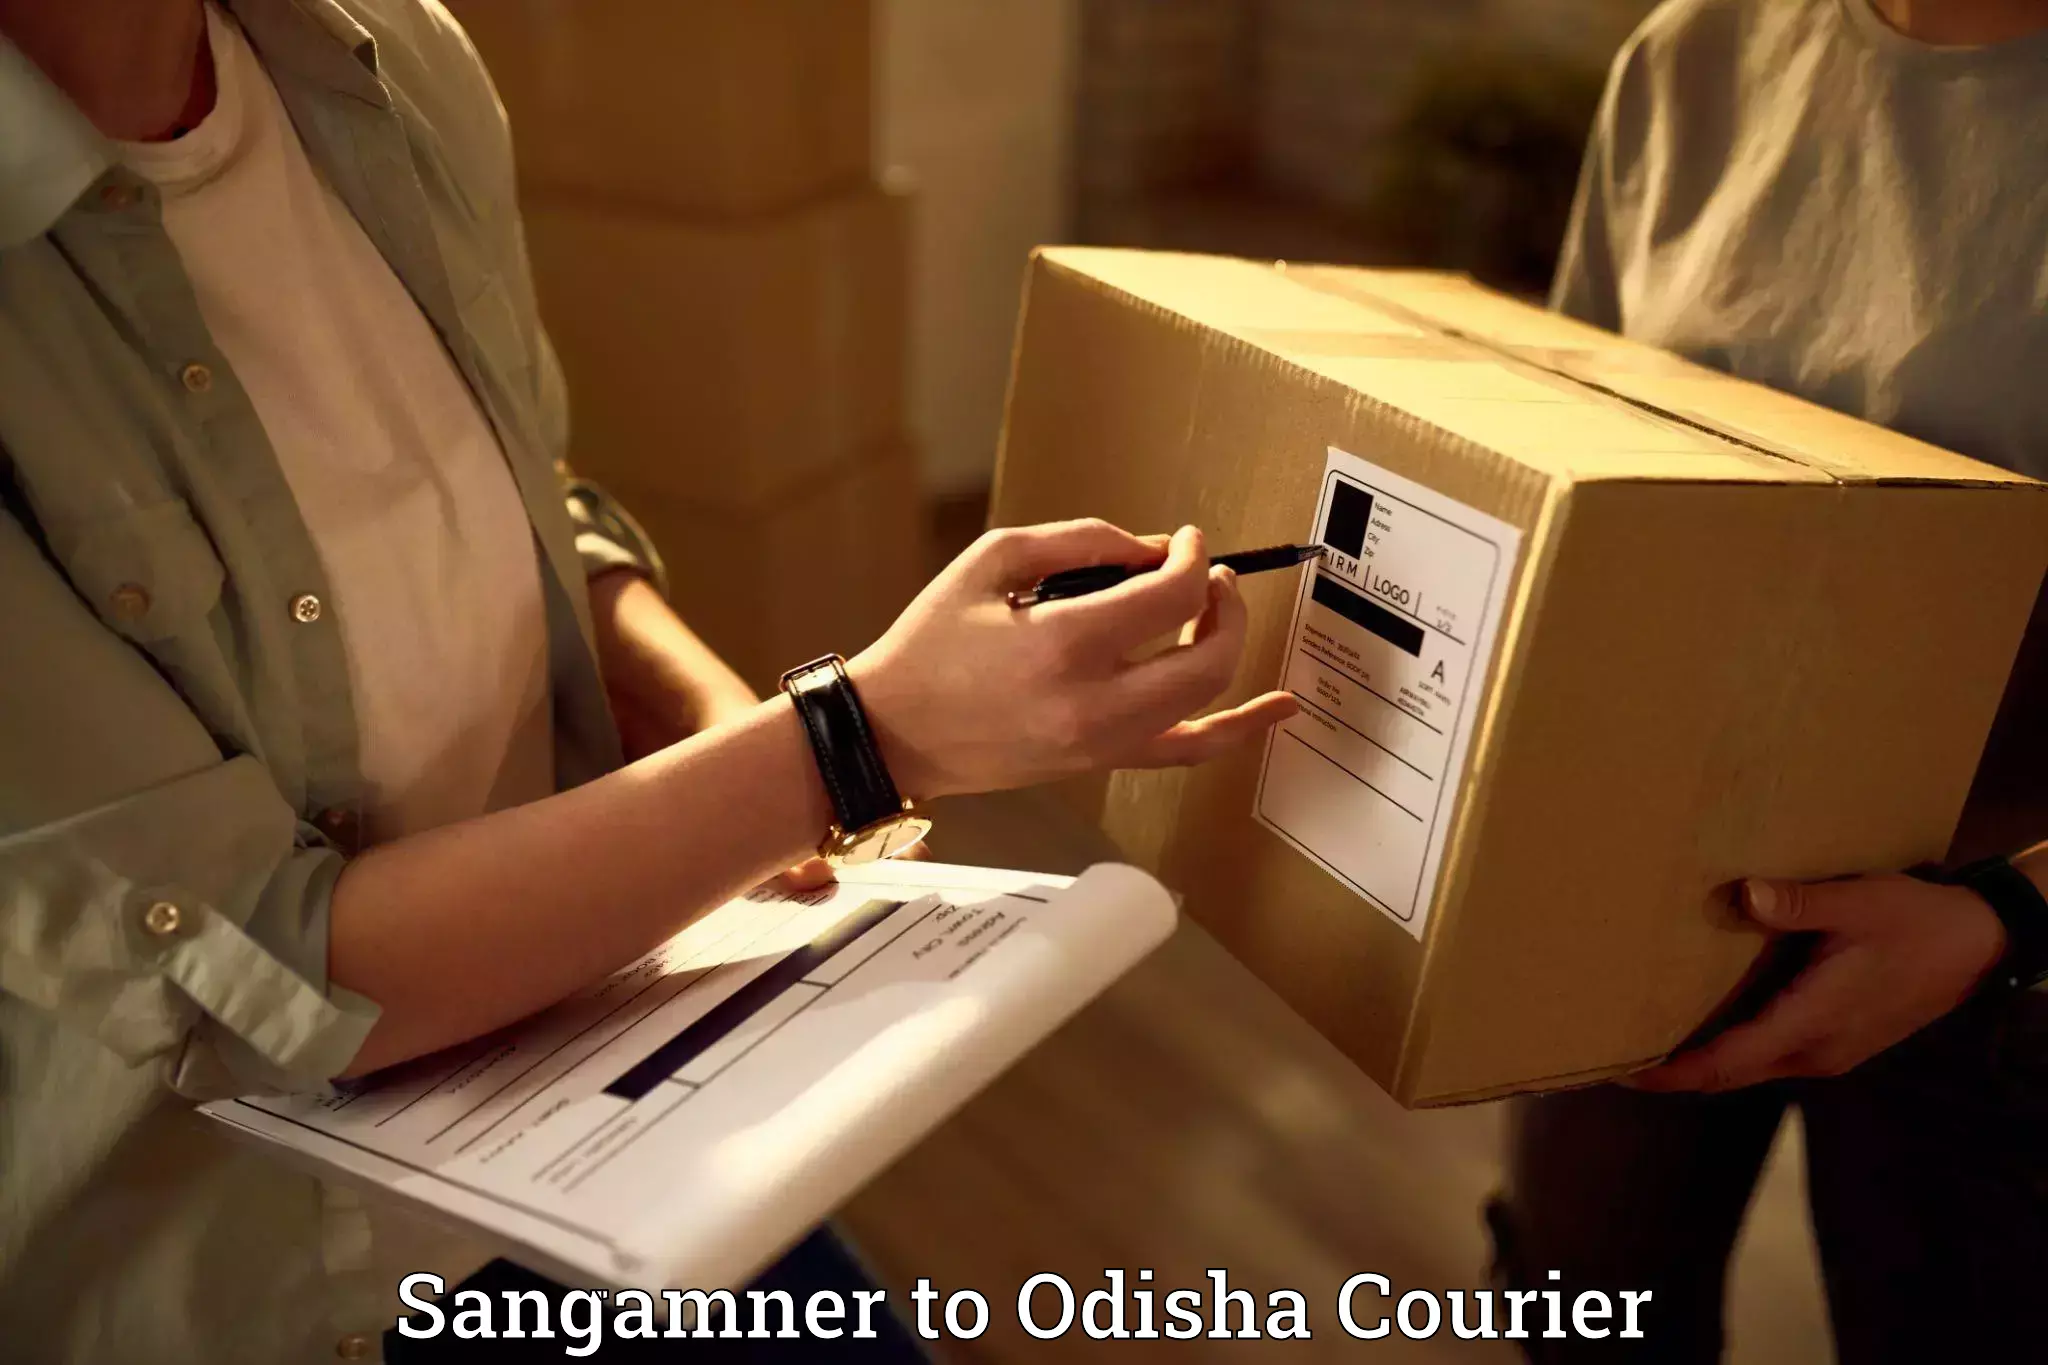 Furniture delivery service Sangamner to Boudh